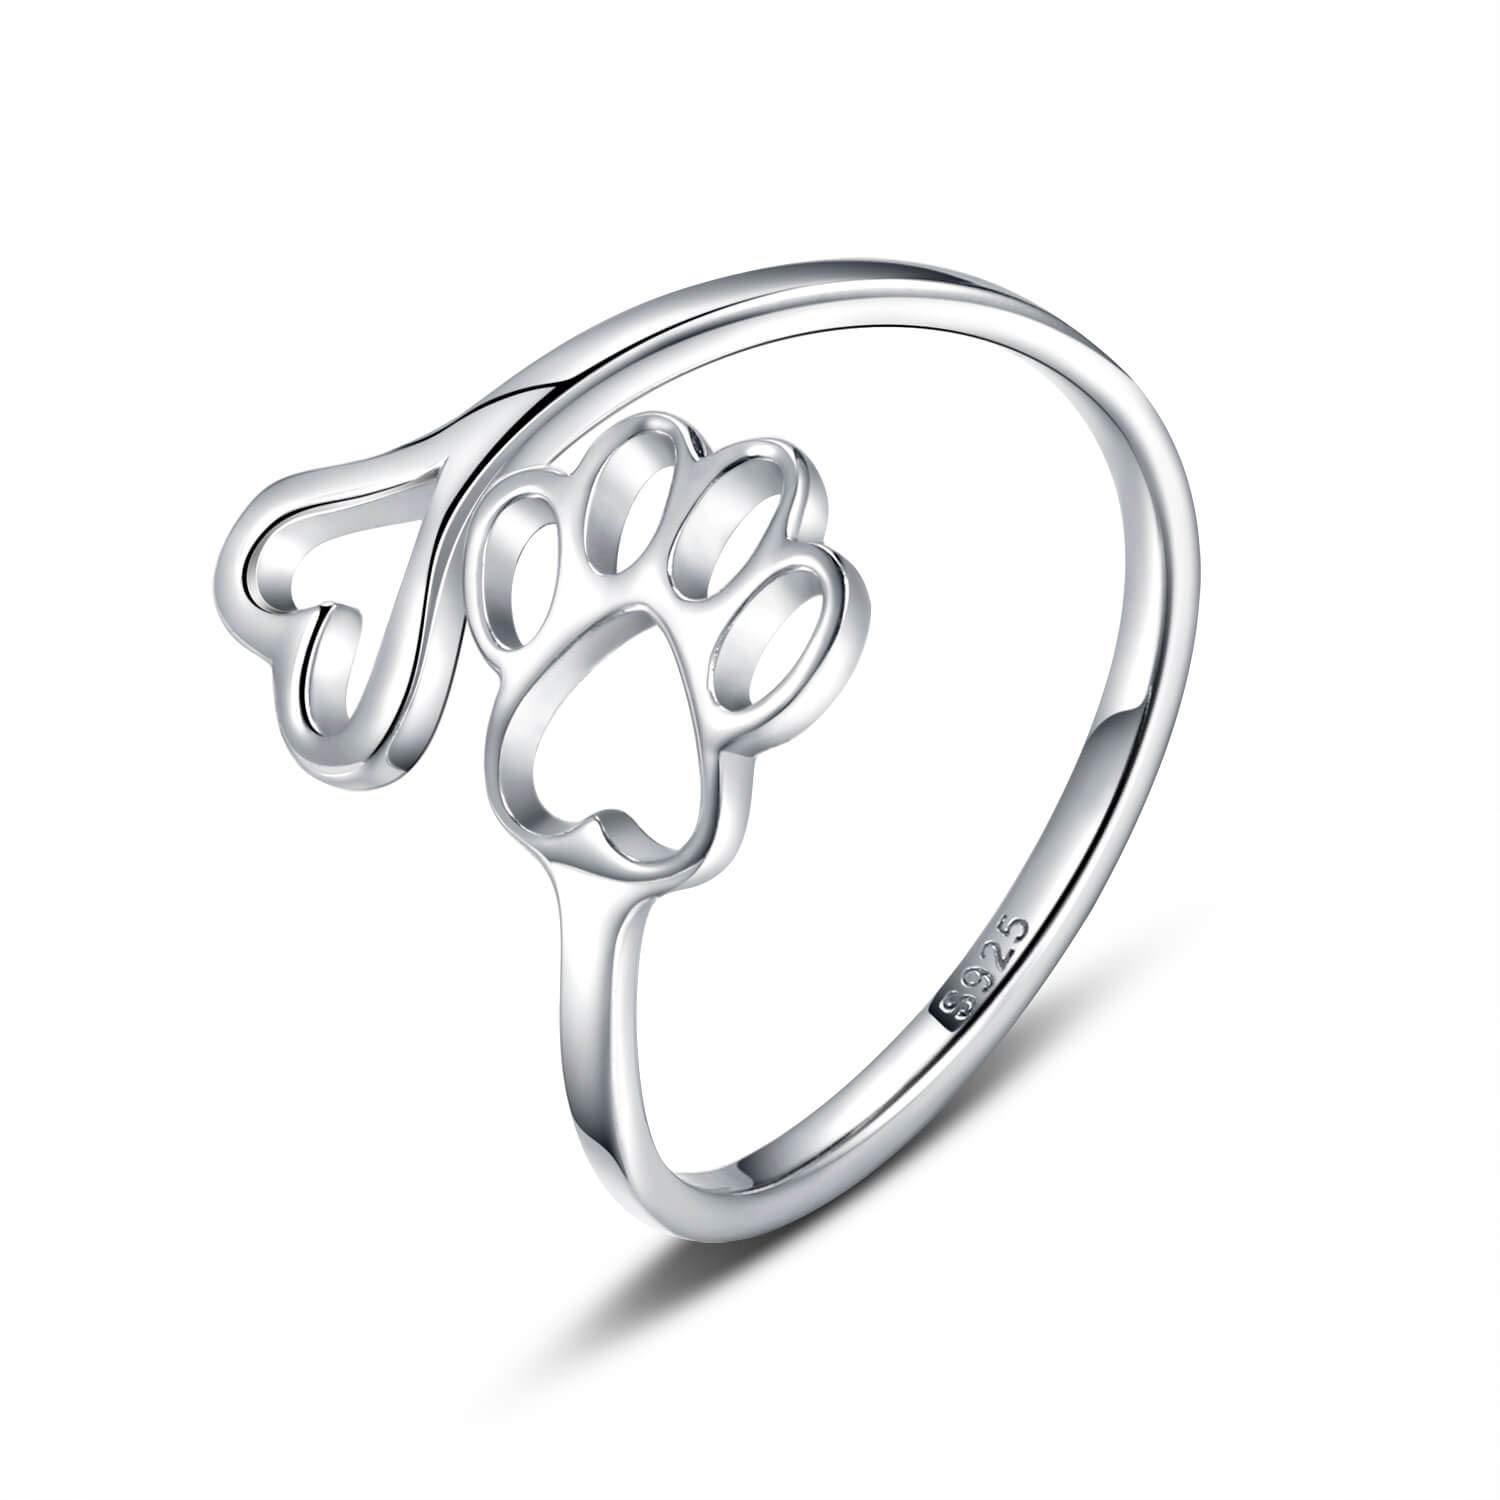 Puppy Pet Lovers Paw Print Ring Heart 925 Sterling Silver Adjustable Ring Pet Animal Jewelry Creative Pierced Love Dog Cat Claw Ring Pet Loving Friend Families Gifts